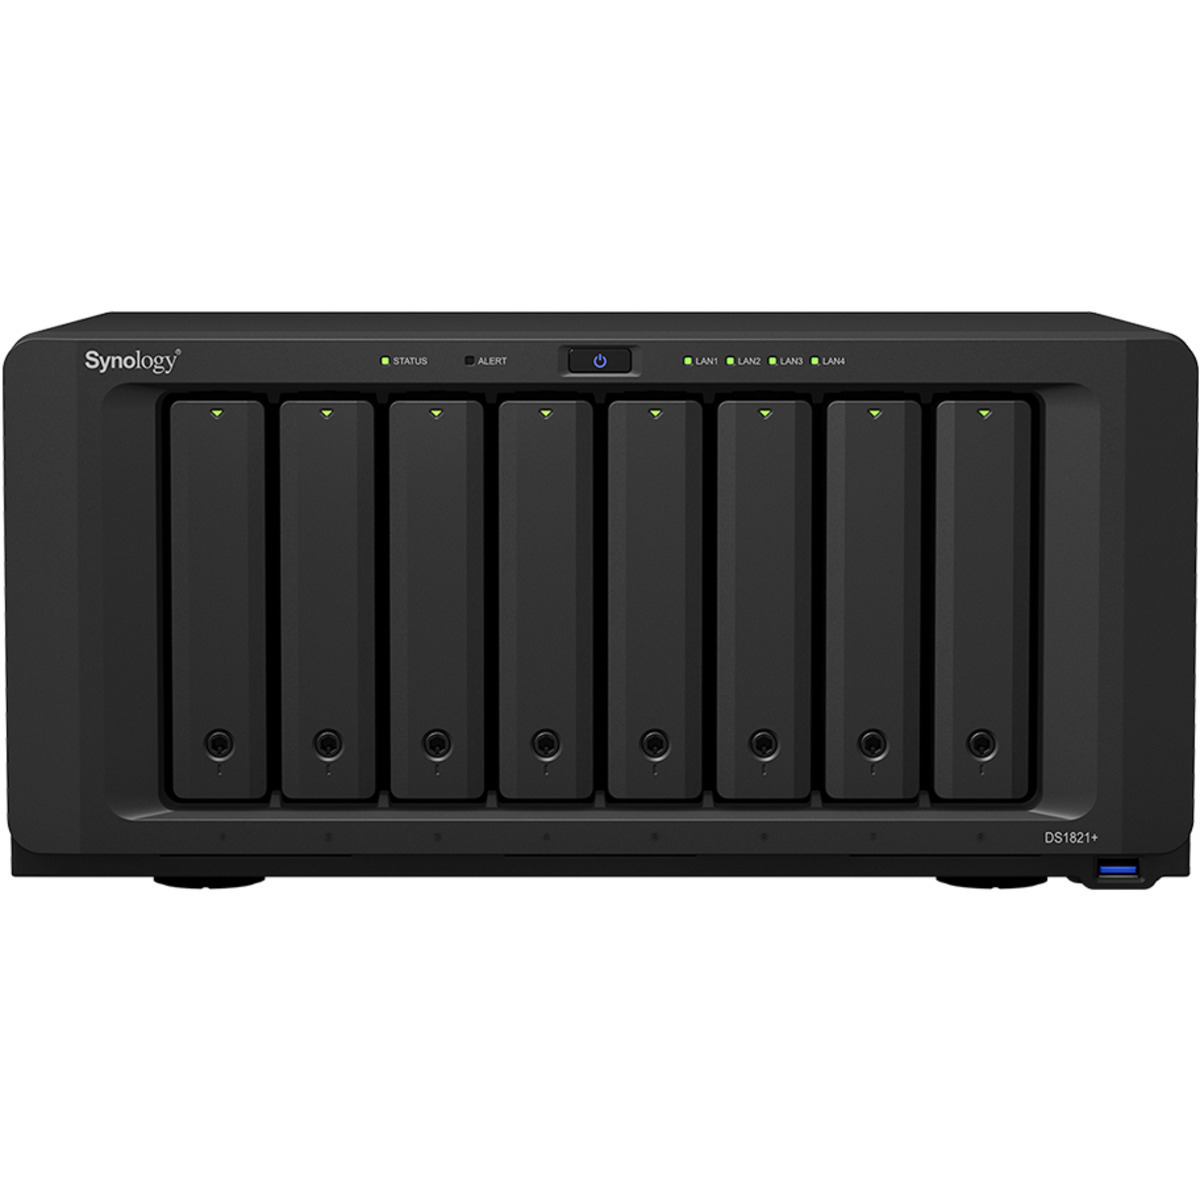 buy $2095 Synology DiskStation DS1821+ 8tb Desktop NAS - Network Attached Storage Device 8x1000gb Samsung 870 QVO MZ-77Q1T0 2.5 SATA 6Gb/s SSD CONSUMER Class Drives Installed - Burn-In Tested - FREE RAM UPGRADE - nas headquarters buy network attached storage server device das new raid-5 free shipping usa DiskStation DS1821+